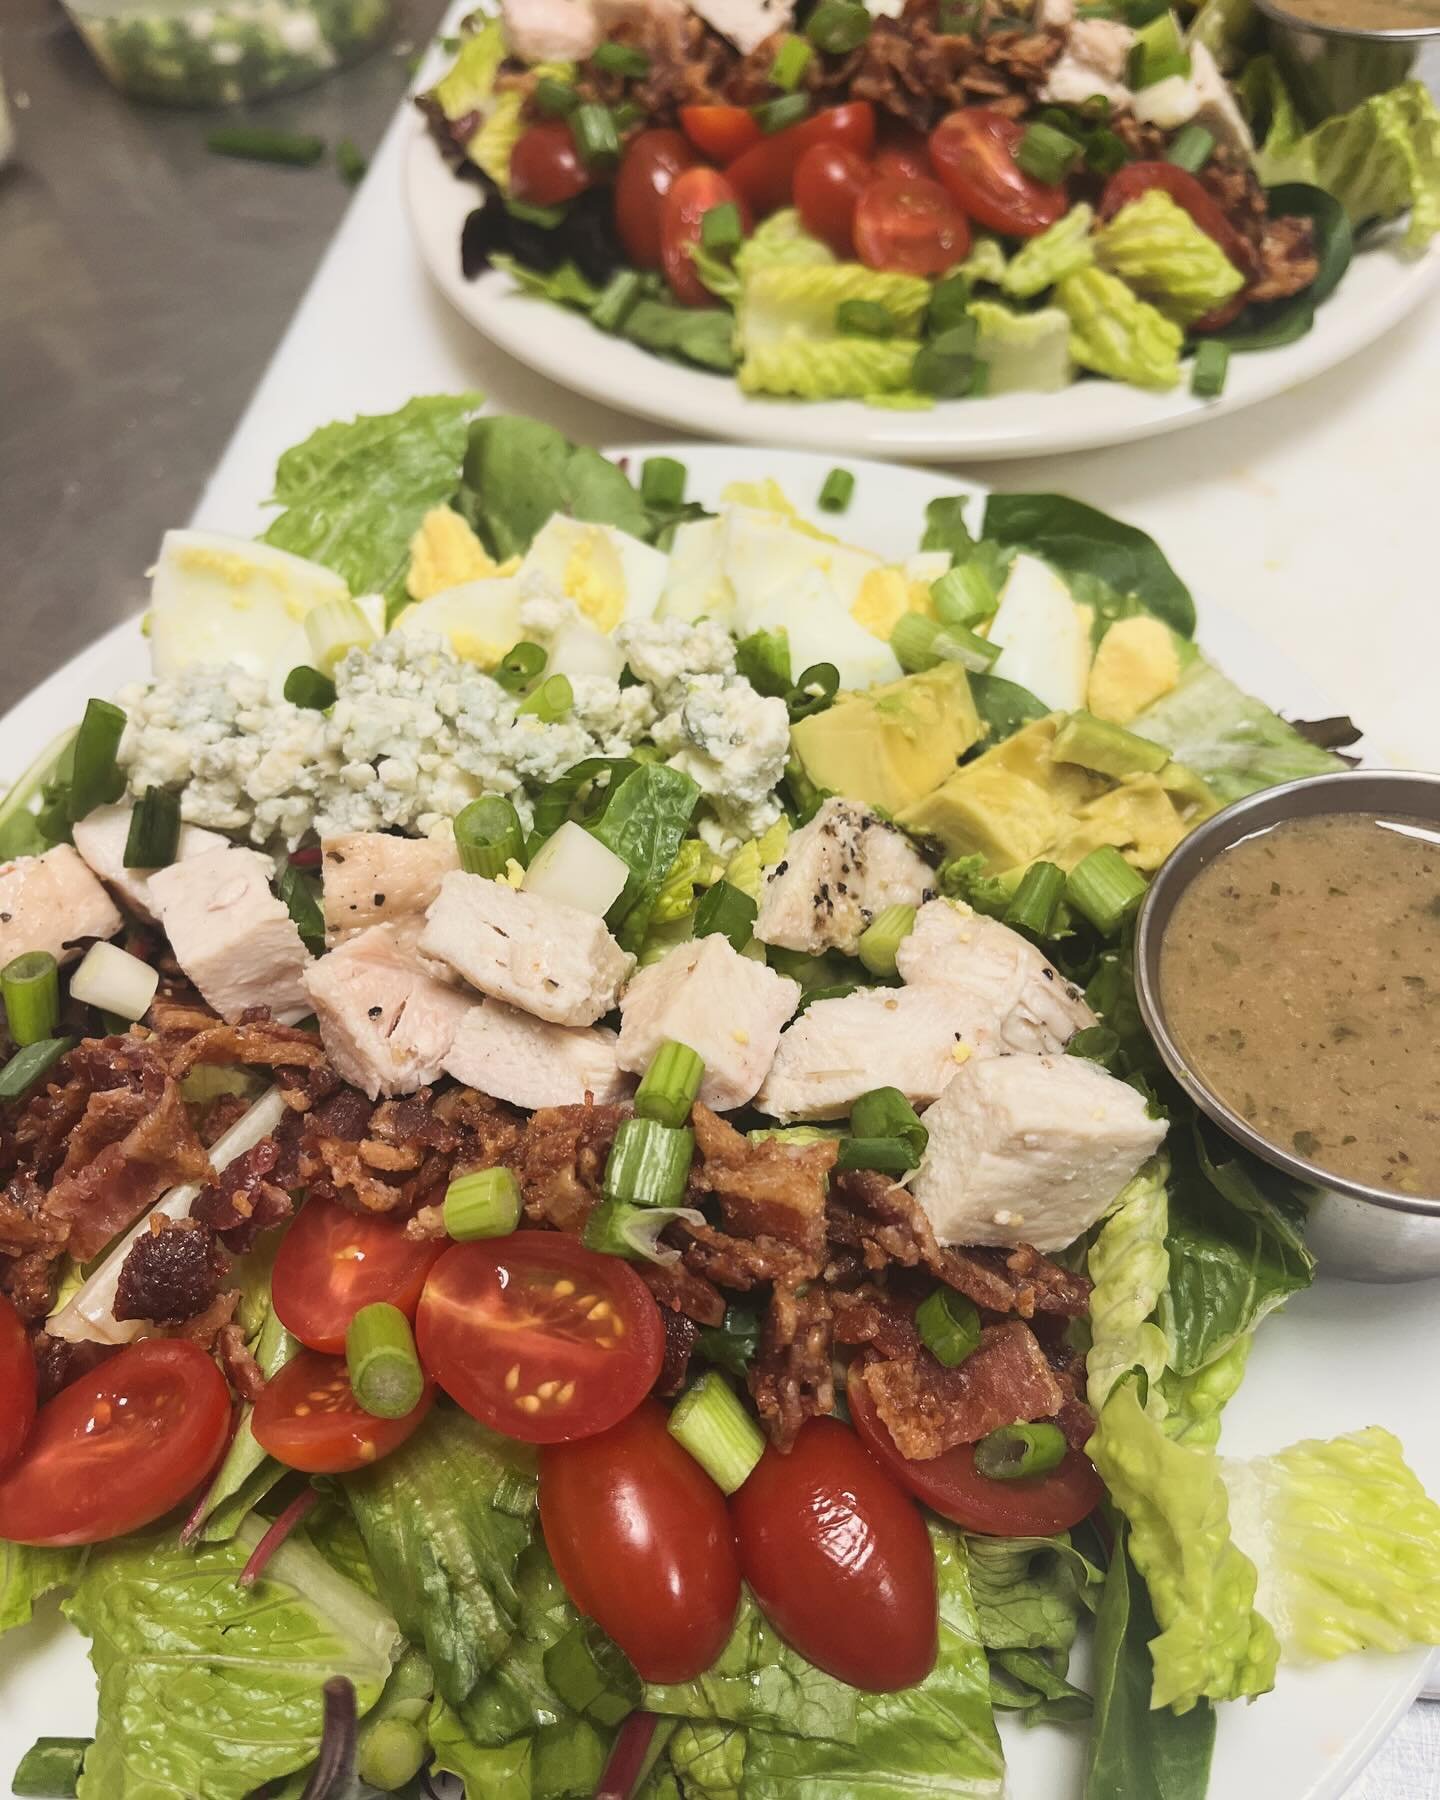 Cobb Salad, Green Salad with soy ginger dressing, and Veggie Wrap! Come for lunch! 11-2, pick up til 2:30!